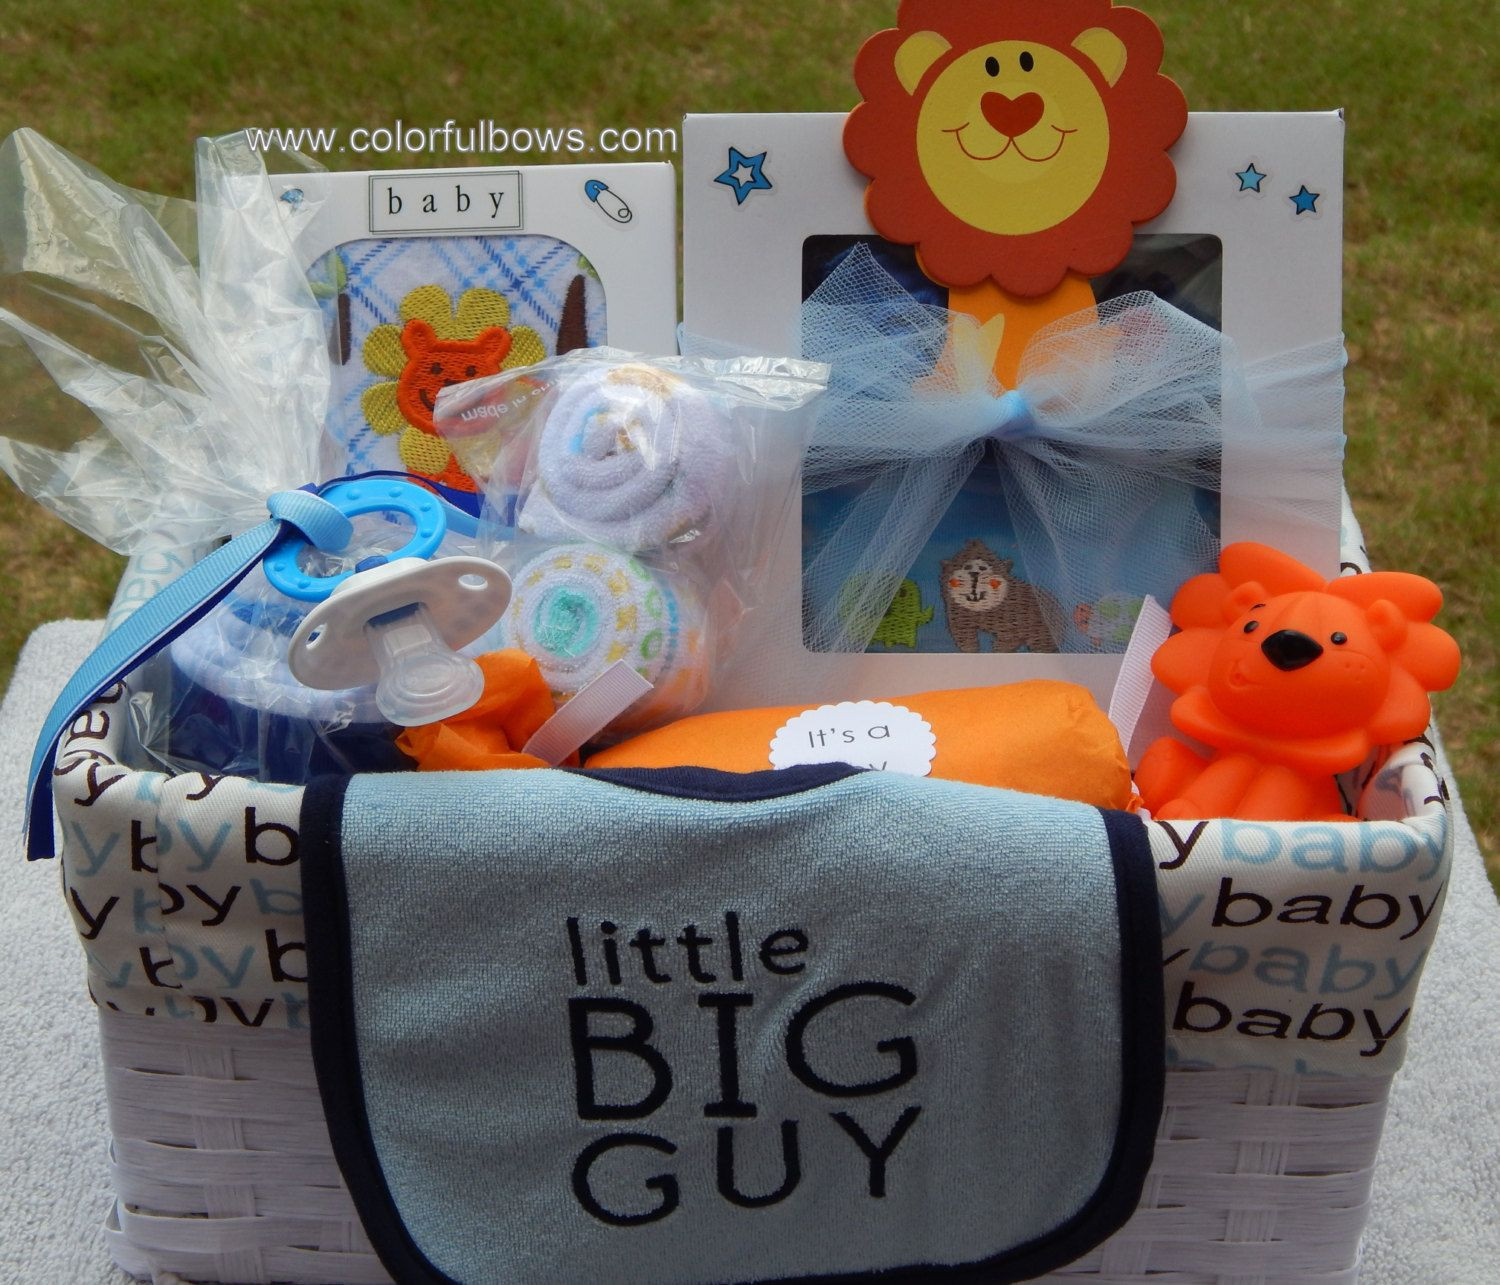 Toddler Gift Ideas For Boys
 Premium Little Big Guy Baby Boy Gift Basket READY TO